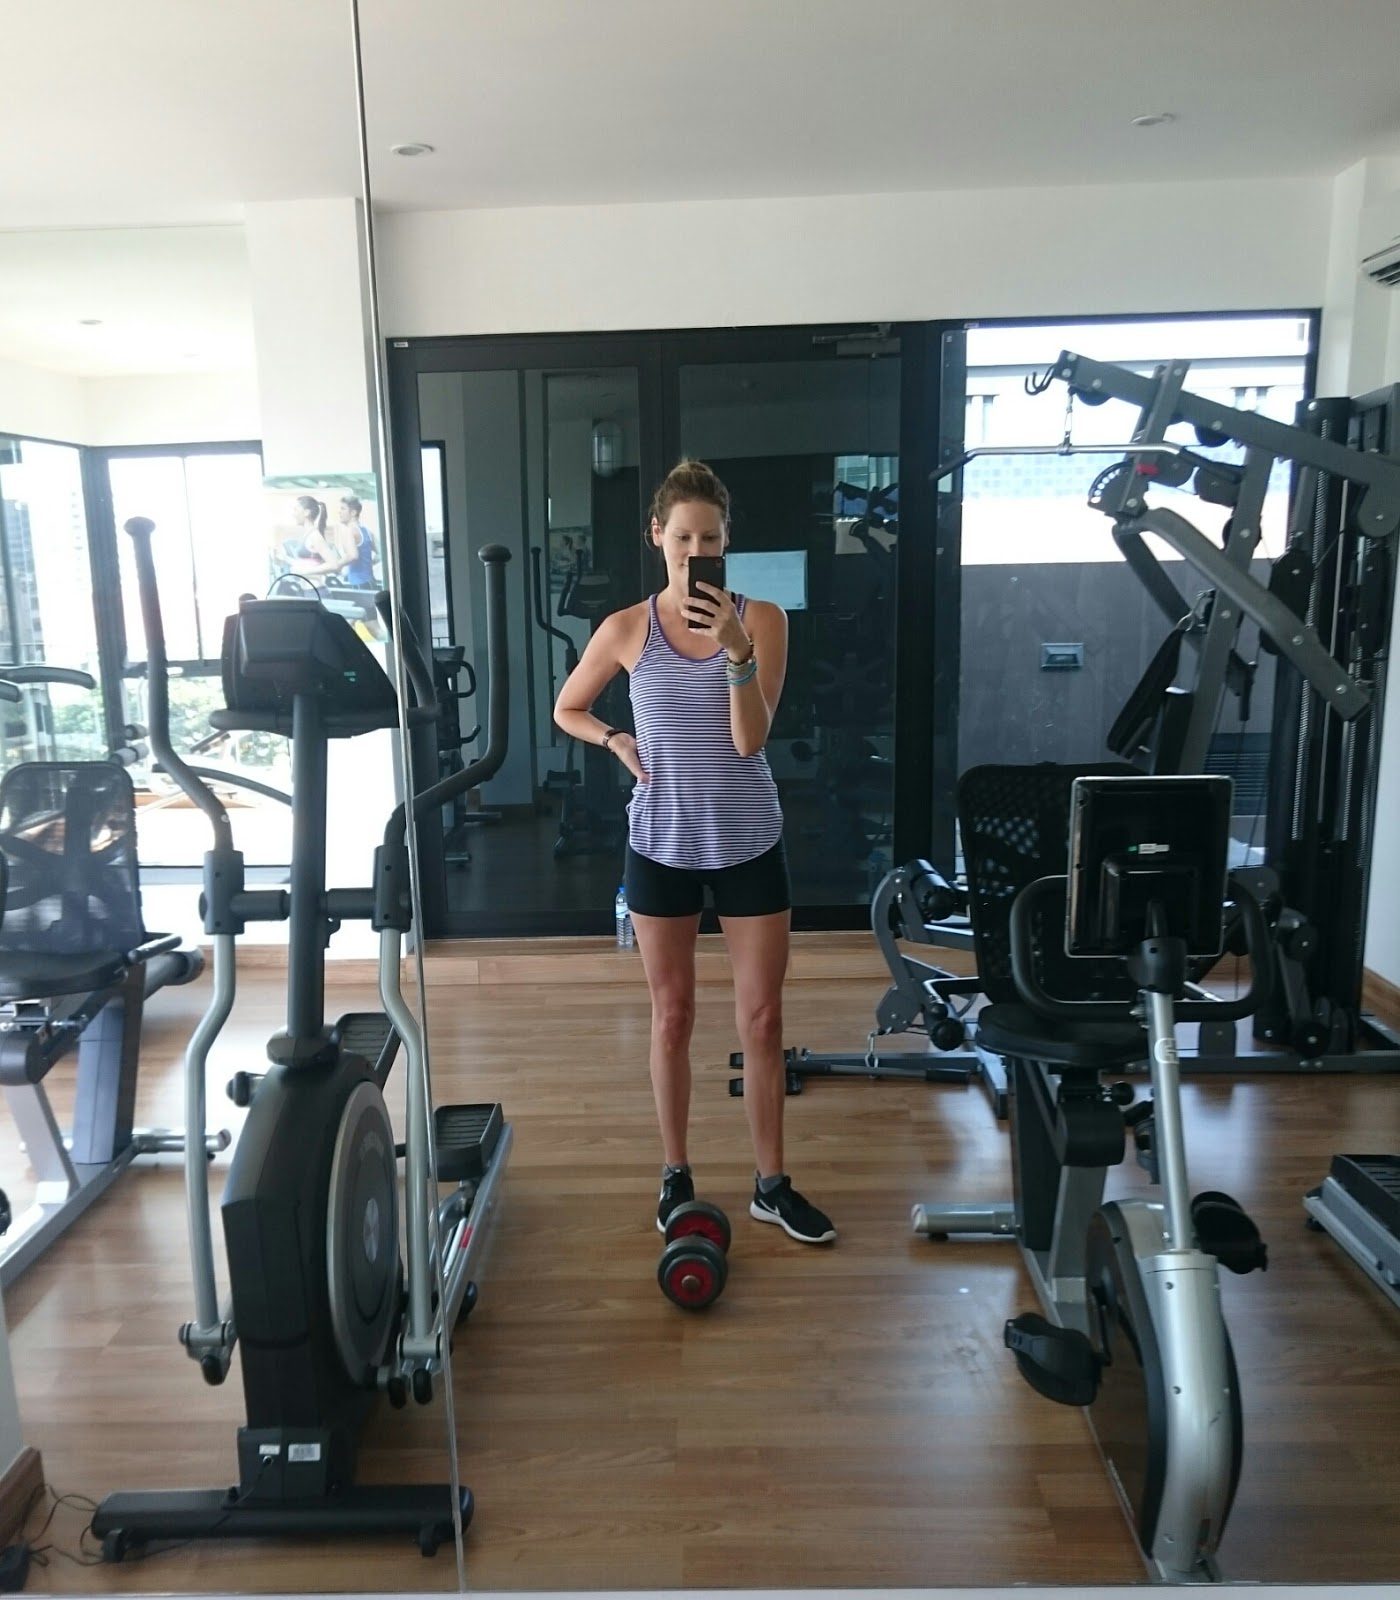 Travel blogger and digital nomad, Alison Hutchinson, is working out in the gym at the Nimman Palm Springs in Chiang Mai